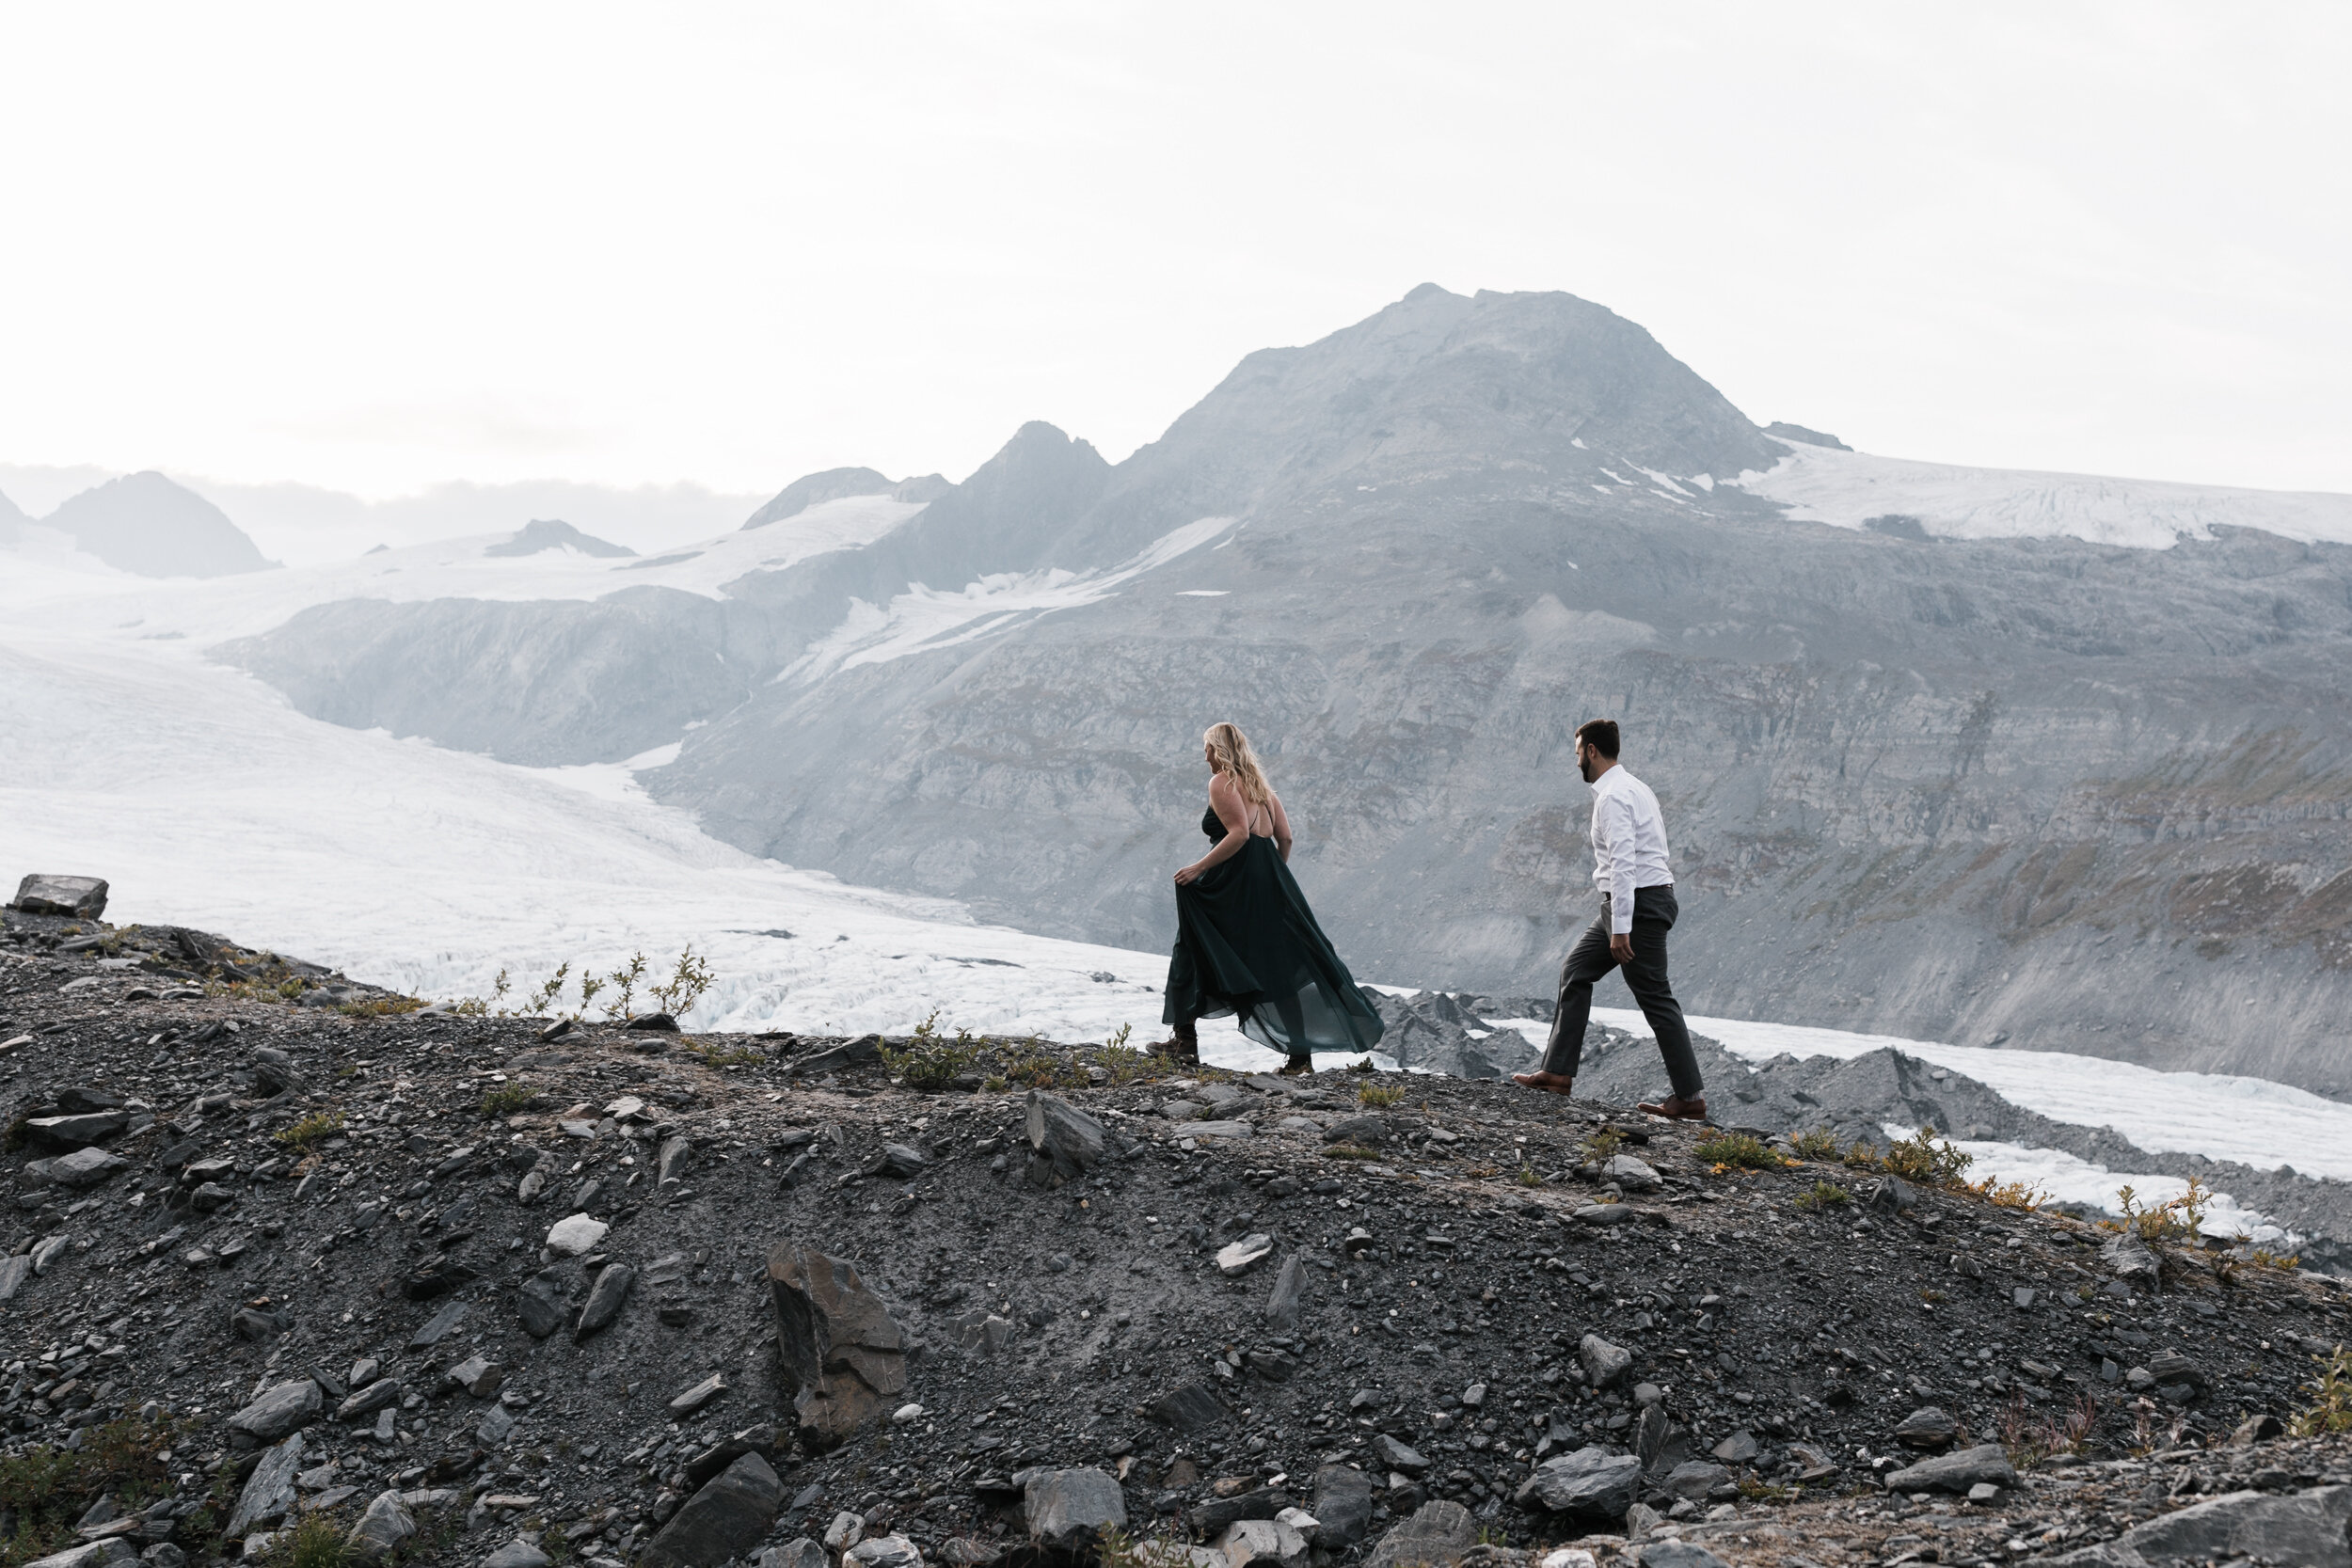 Engagement Session in Alaska | August Fall Colors on a Glacier Hike | The Hearnes Adventure Wedding Photography